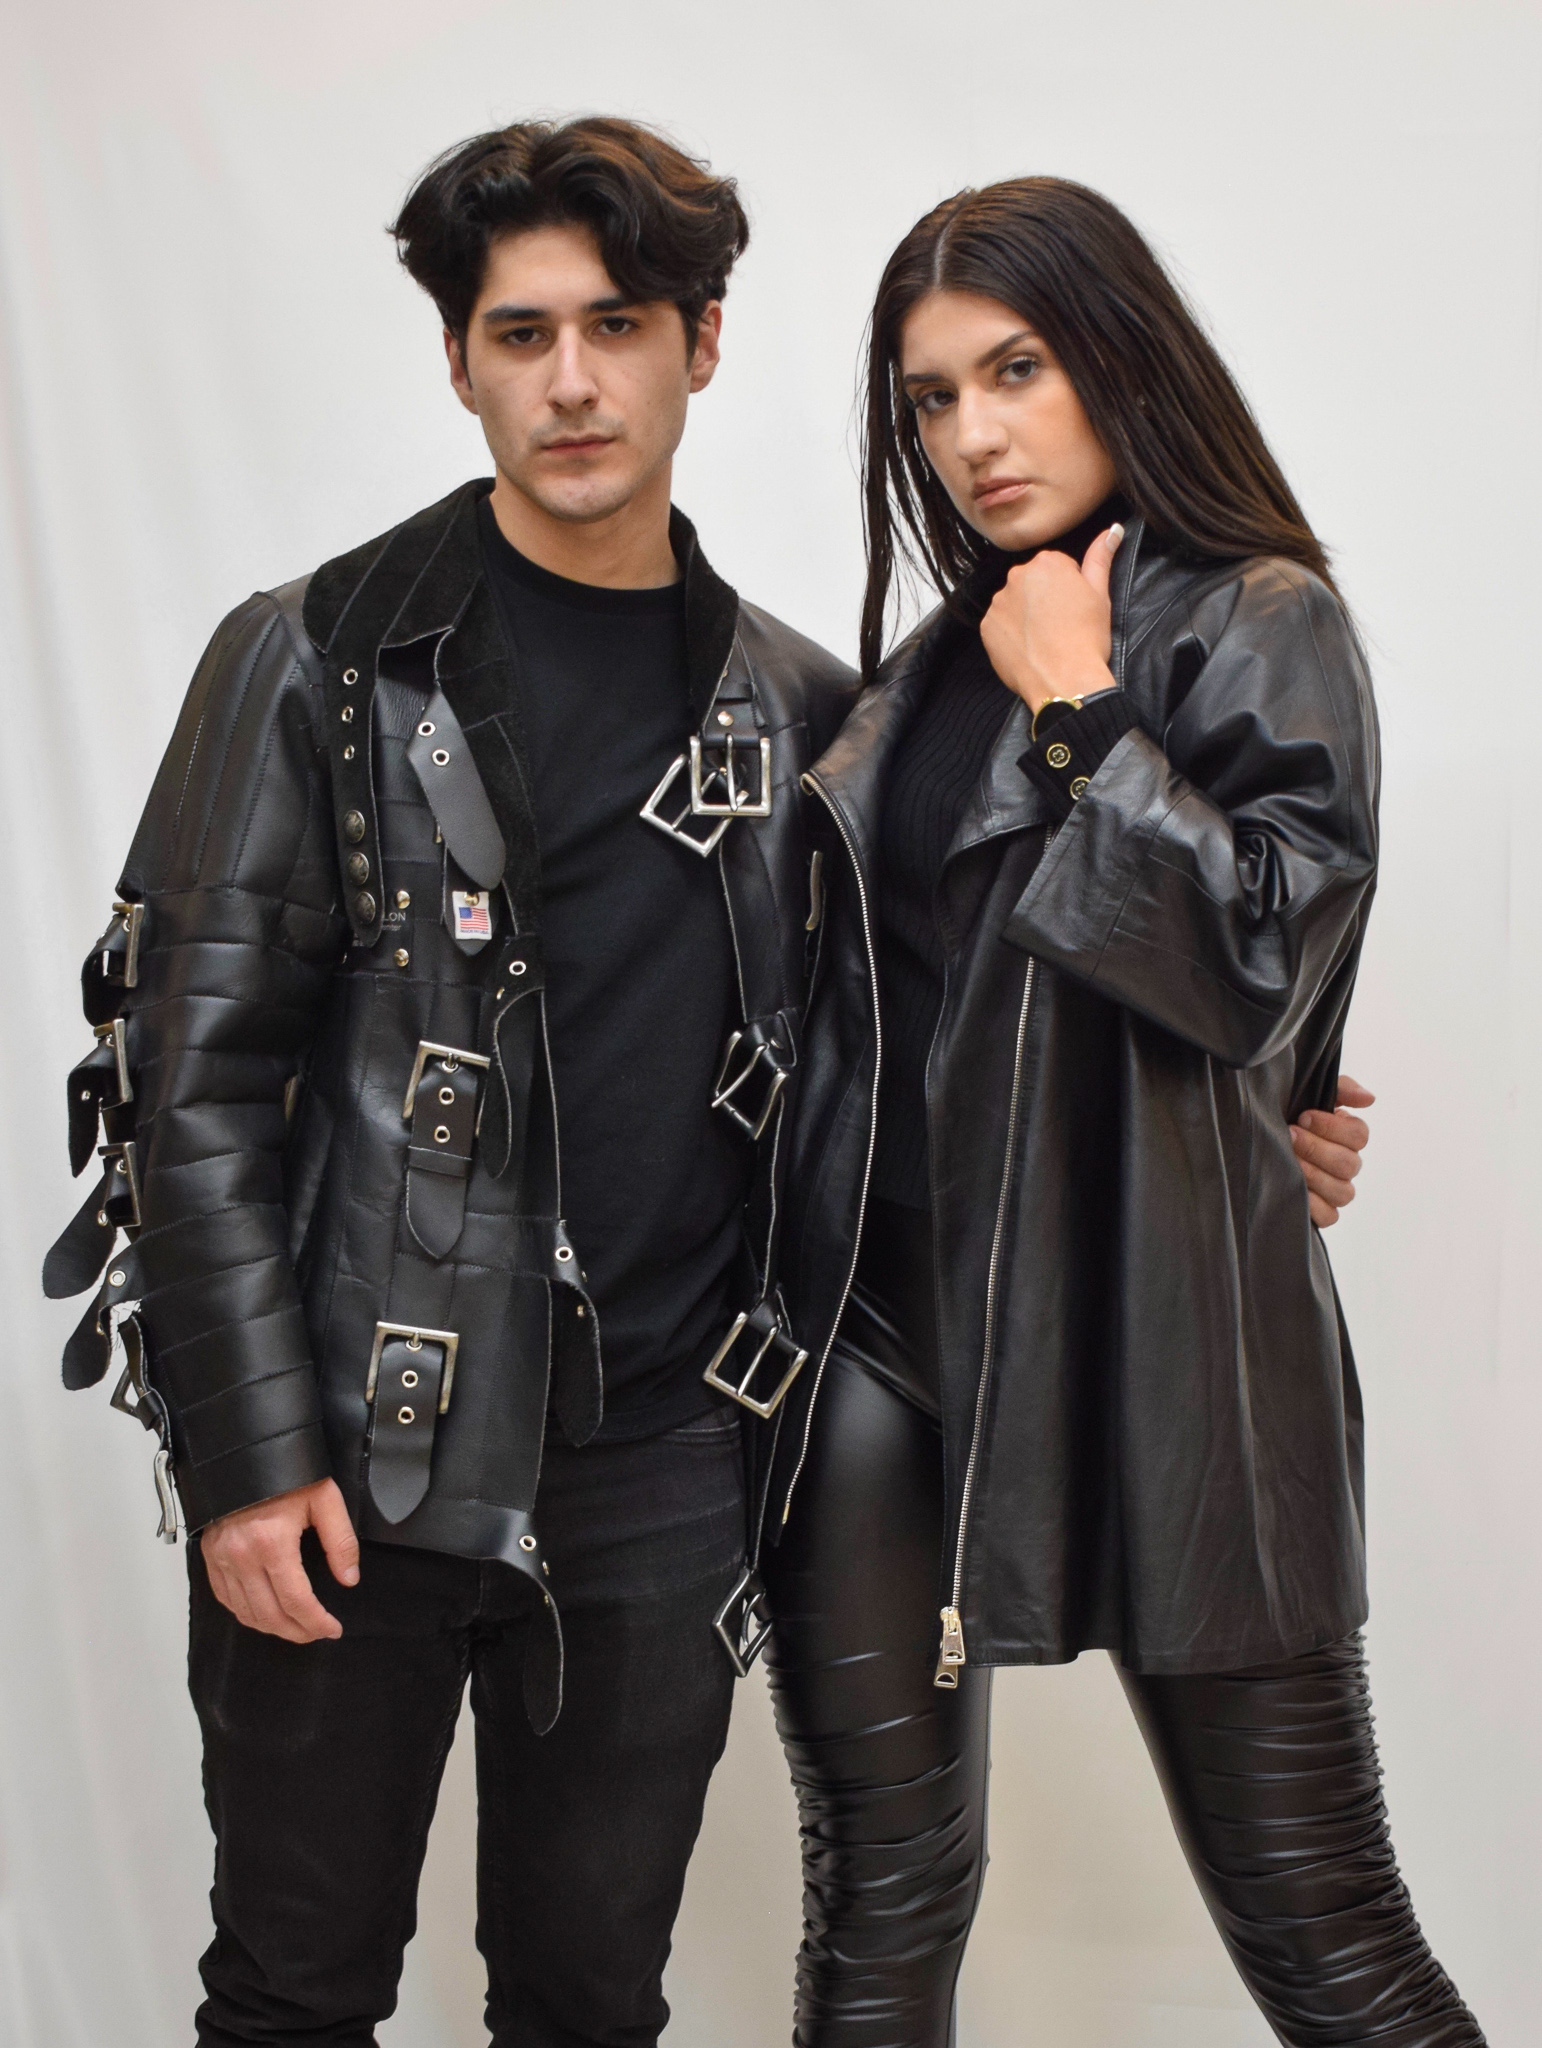 Man and woman posing together while wearing all black leather